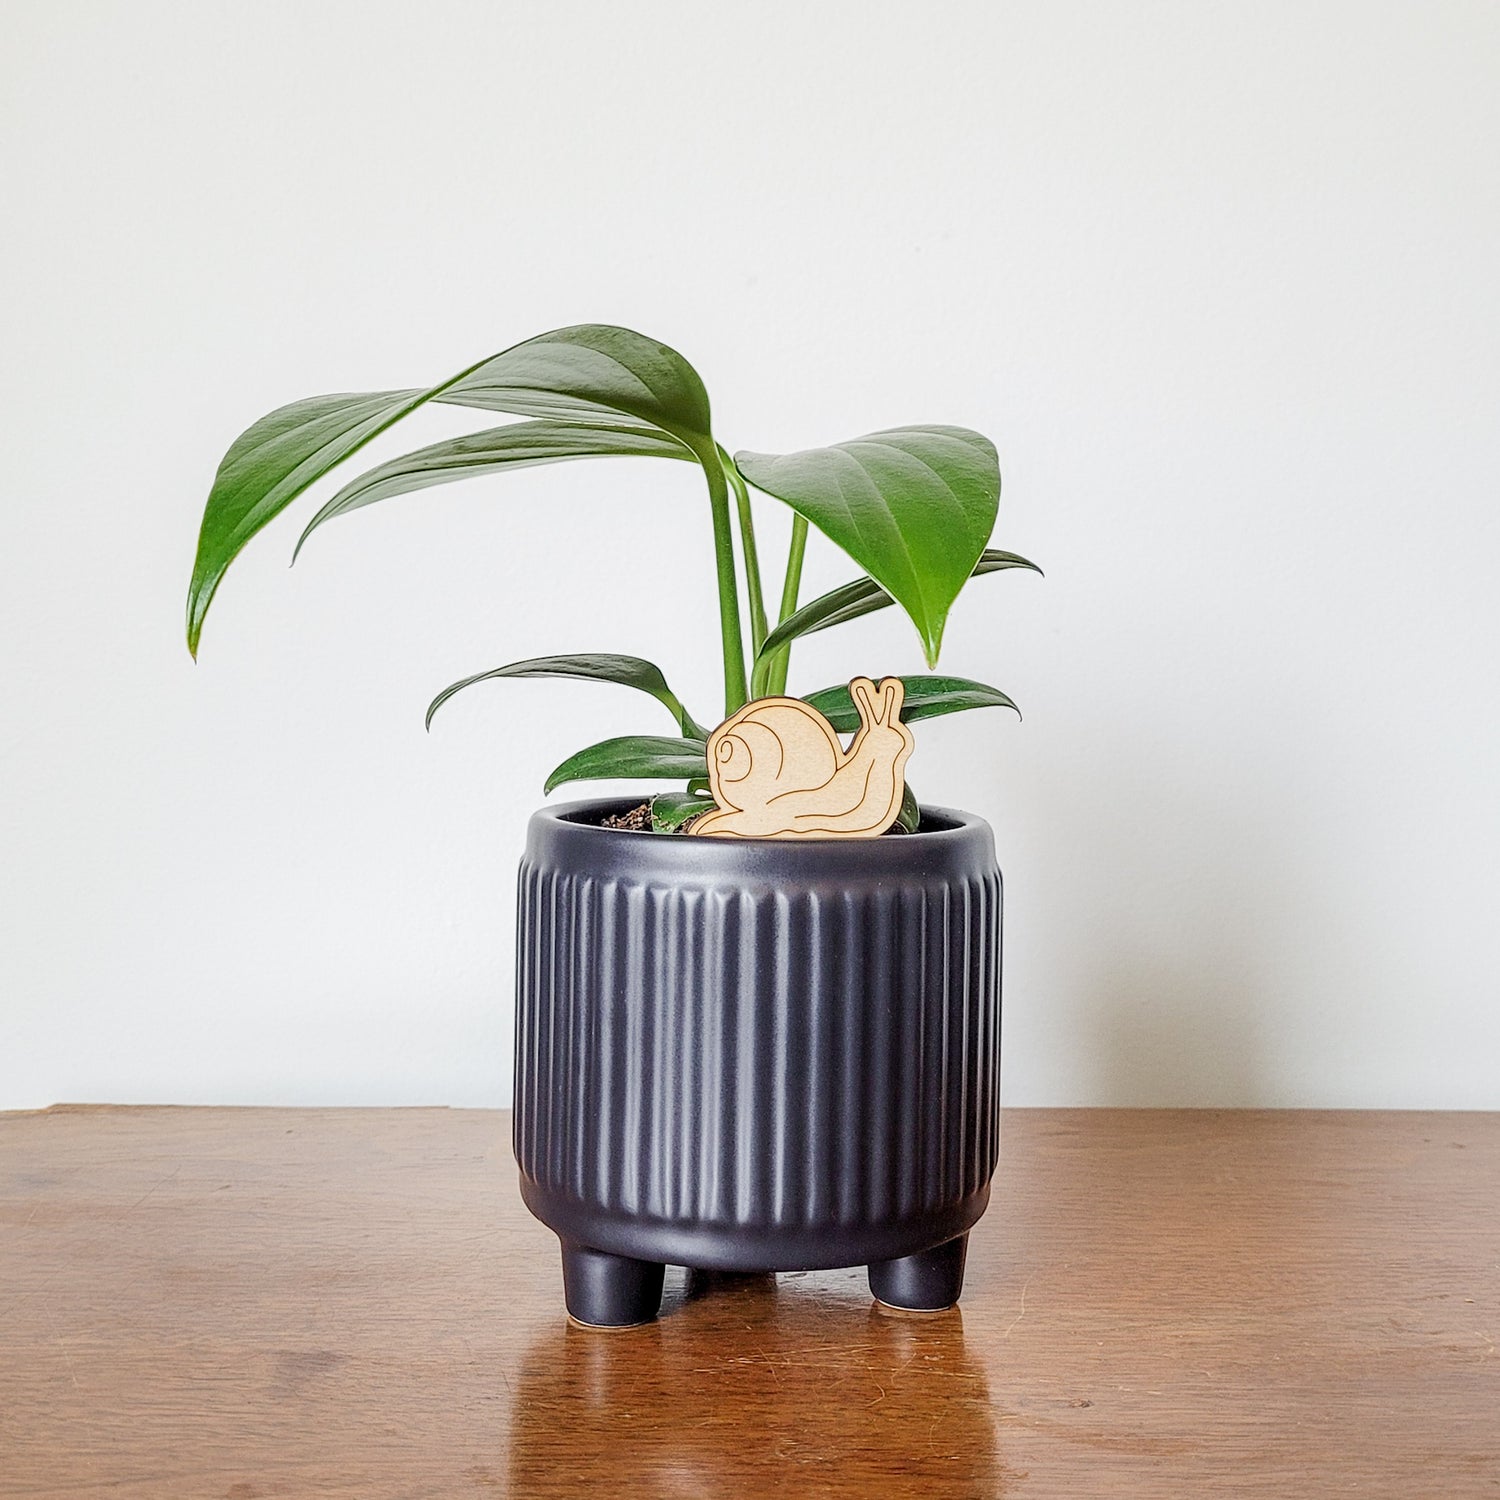 Single mini snail decorative plant stake displayed in a 3 inch black pot with a dragon tail plant.